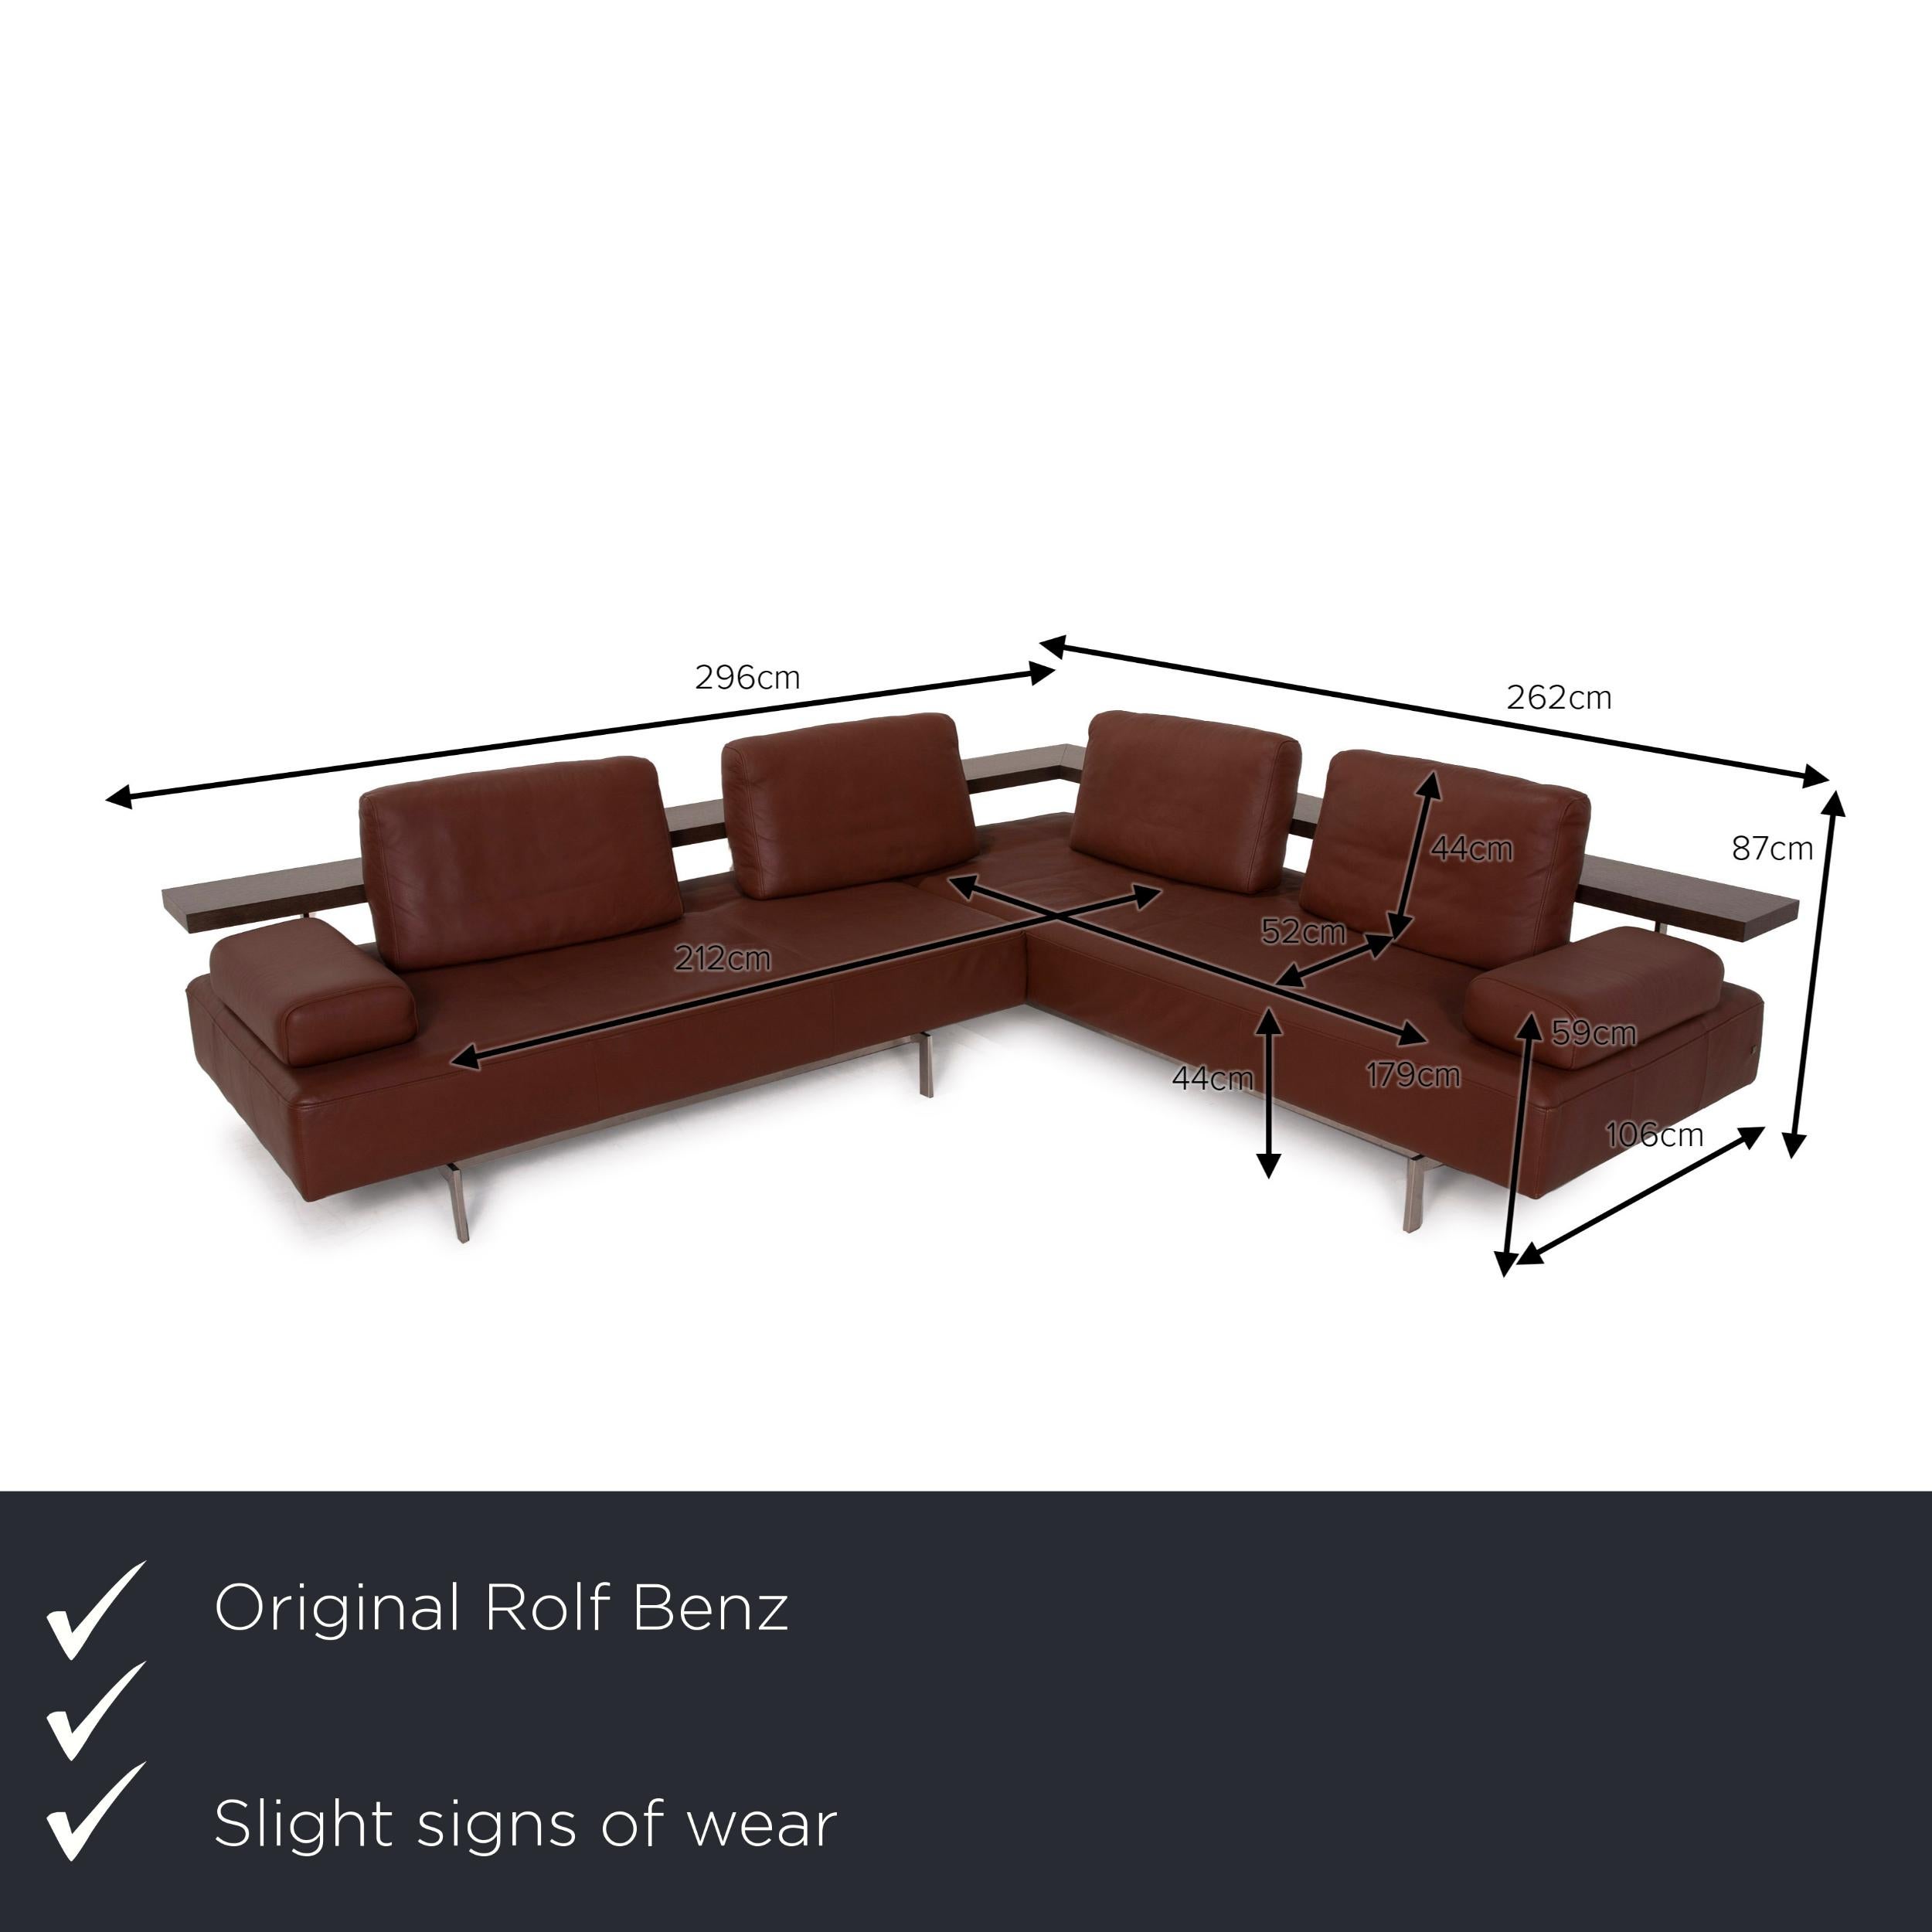 We present to you a Rolf Benz Dono leather sofa brown corner sofa.
 
 

 Product measurements in centimeters:
 

Depth: 106
Width: 296
Height: 87
Seat height: 44
Rest height: 59
Seat depth: 52
Seat width: 212
Back height: 44.